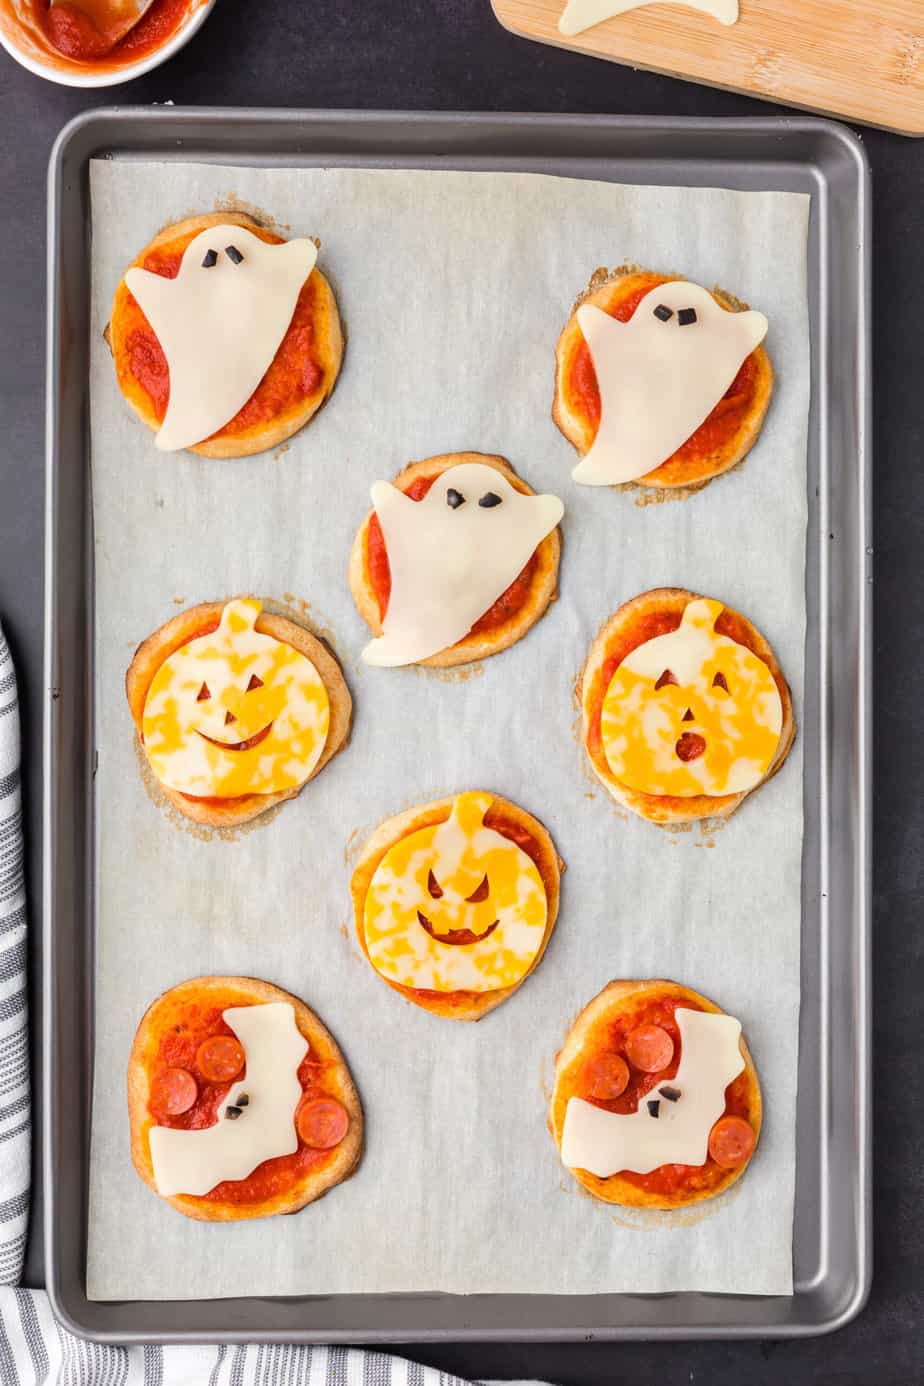 Adding pumpkin, ghost and bat shaped cheese with olive eyes to mini pizzas on a baking sheet.